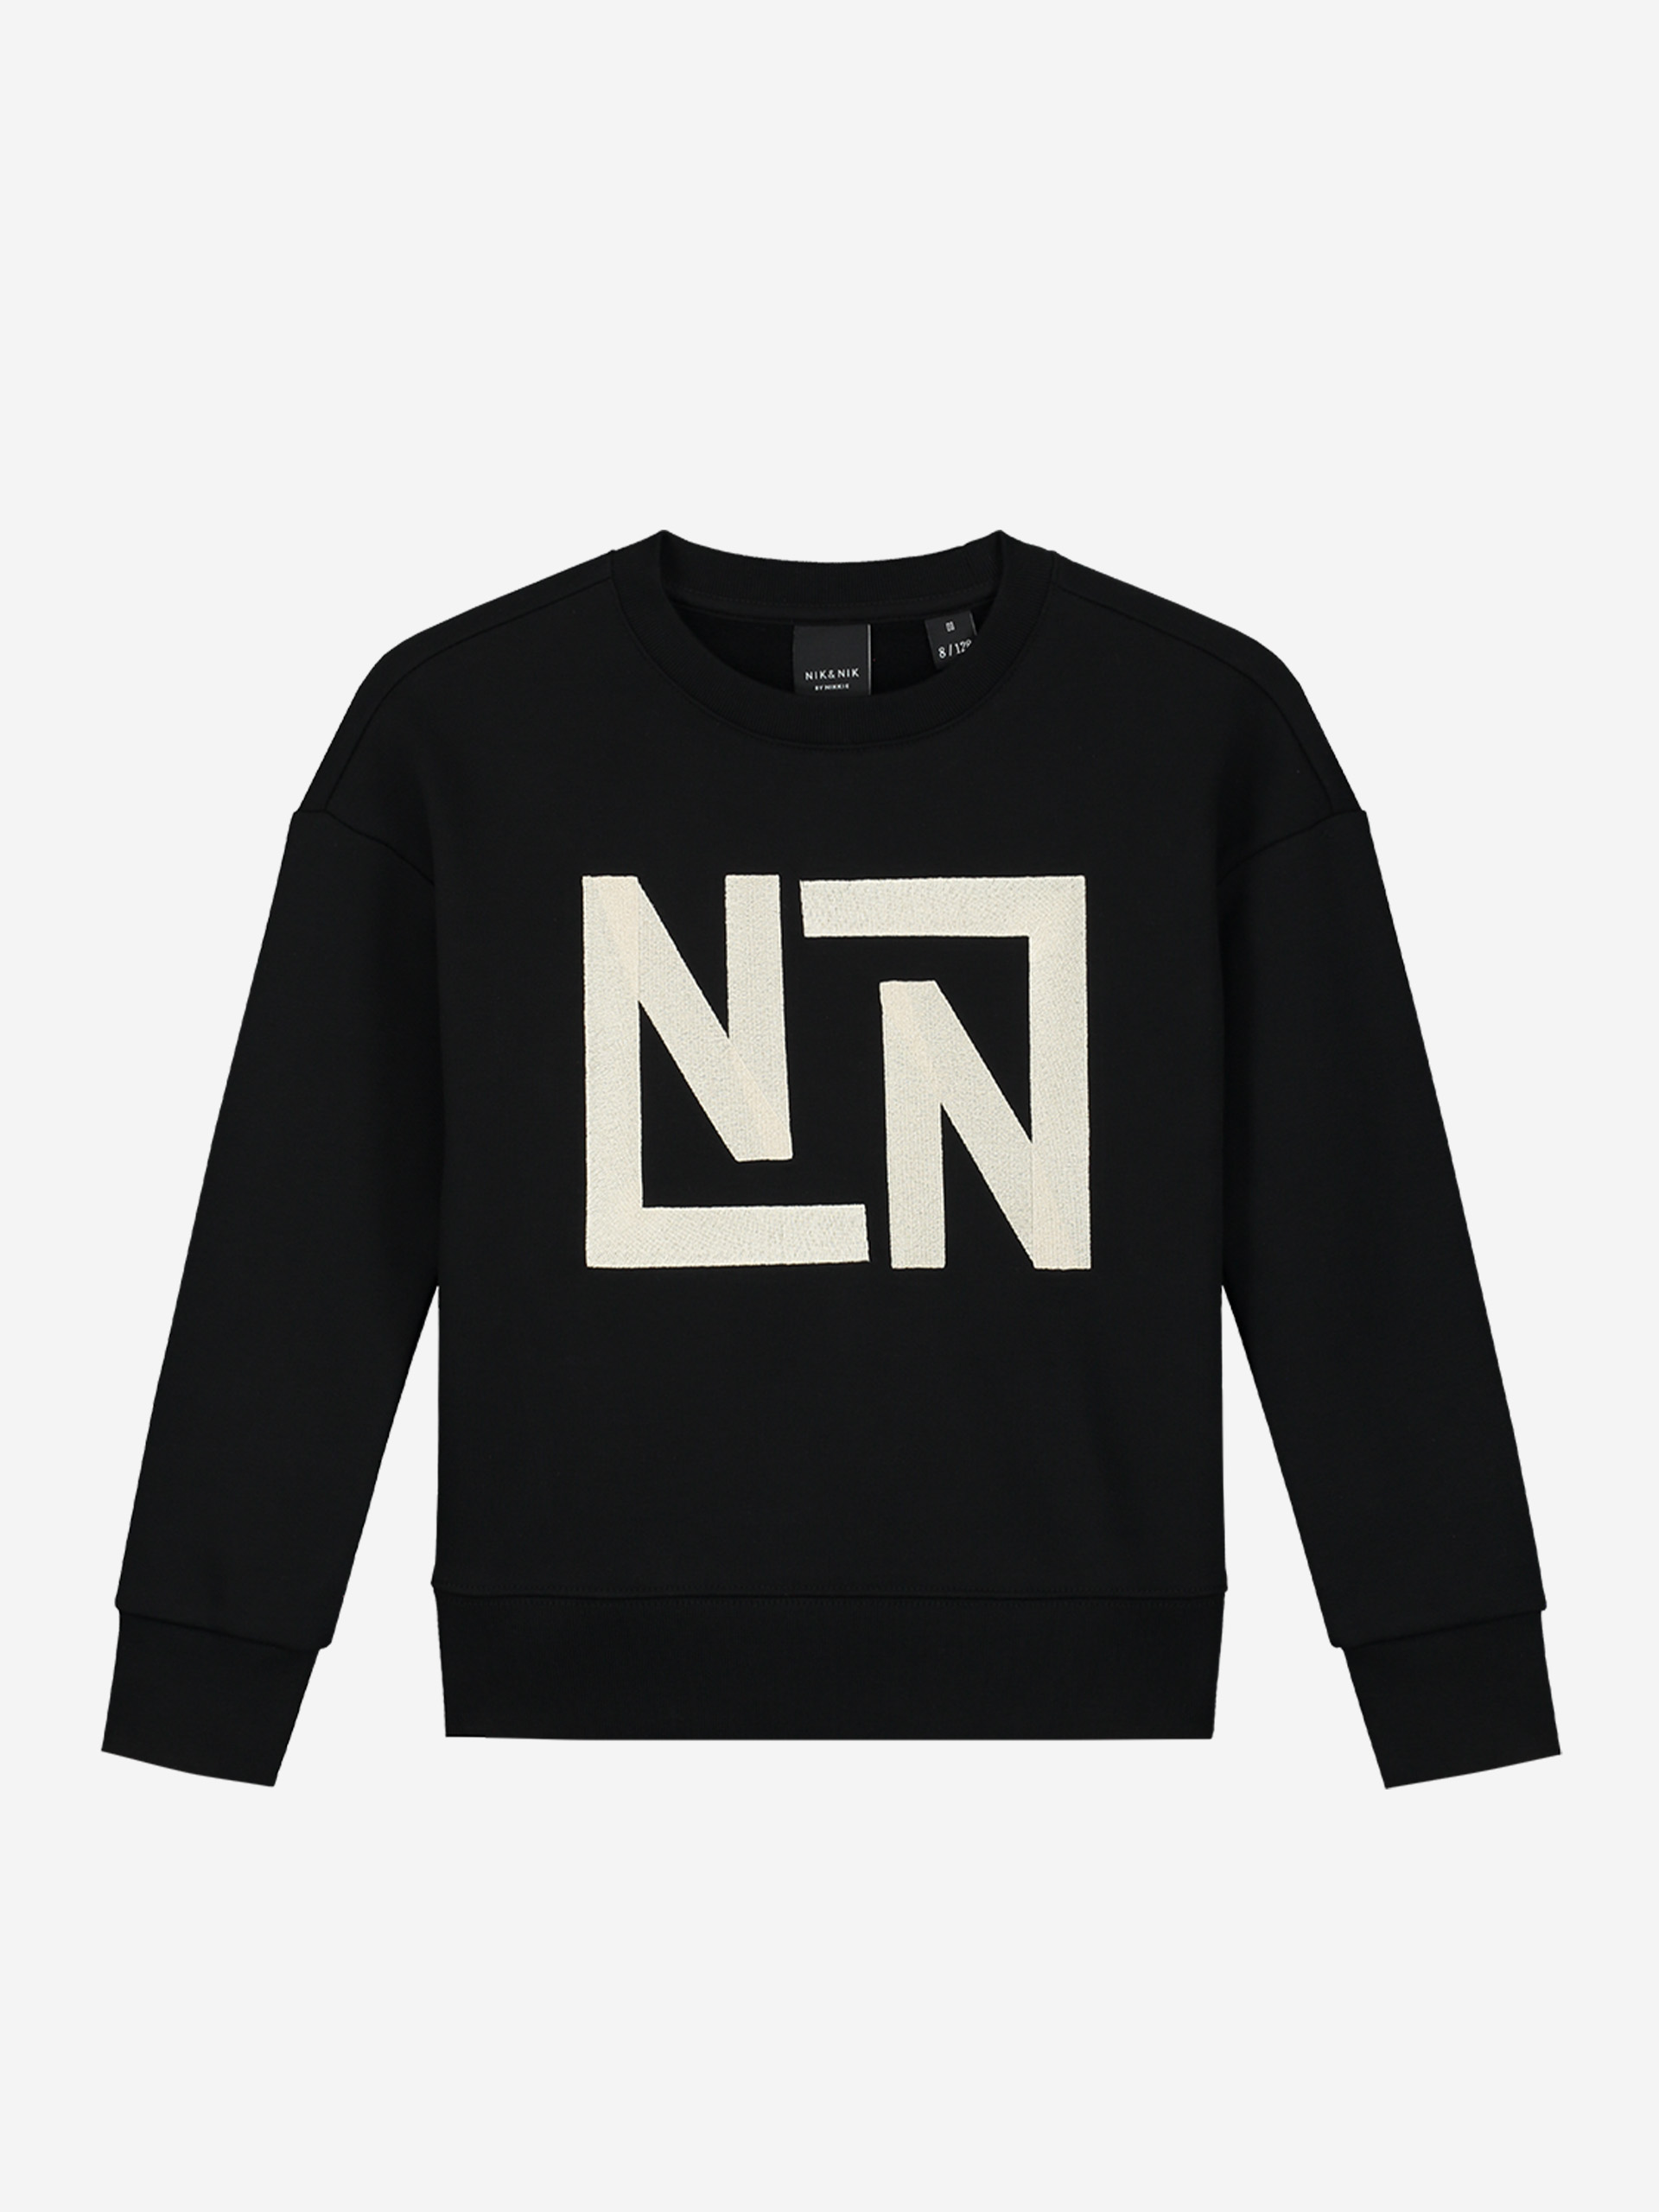 Loose fit NN sweater